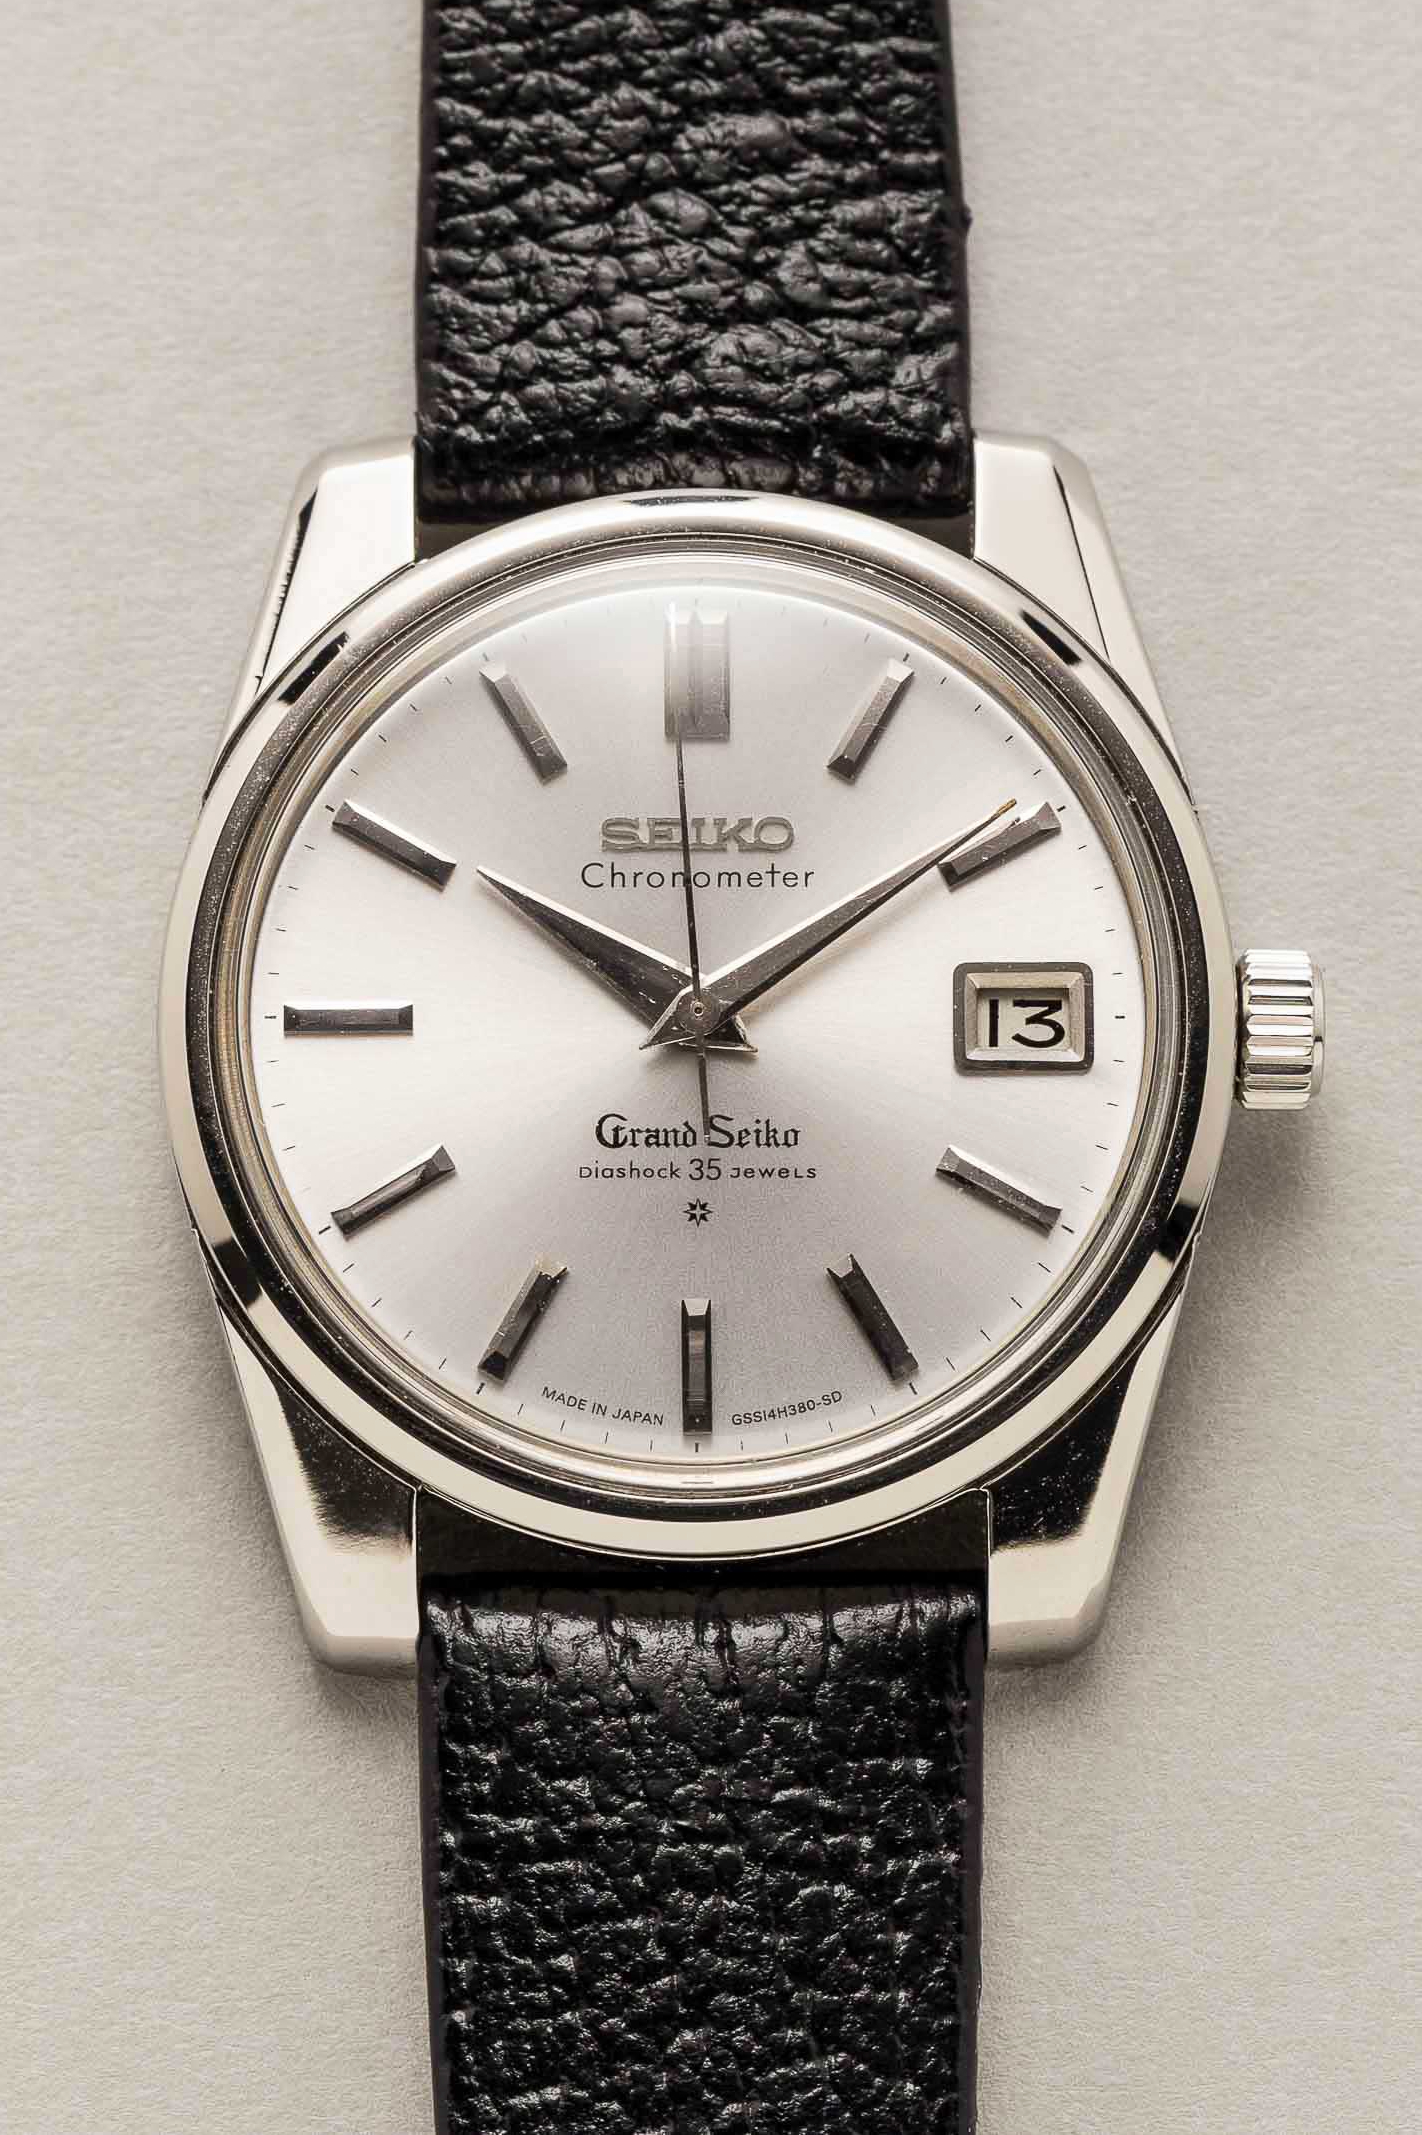 Grand Seiko Chronometer 43999 Steel Crown - Shuck the Oyster 